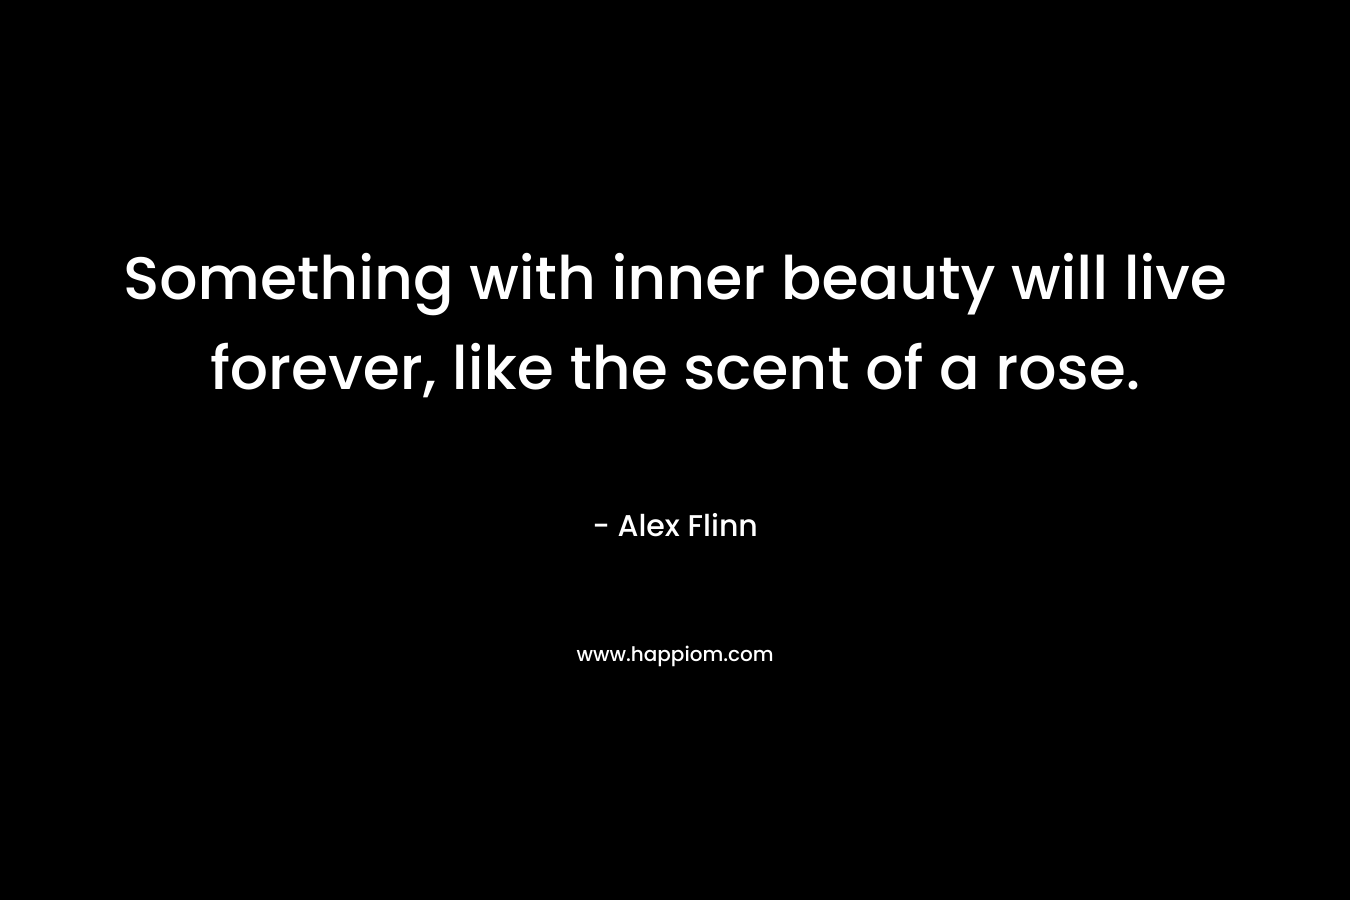 Something with inner beauty will live forever, like the scent of a rose.